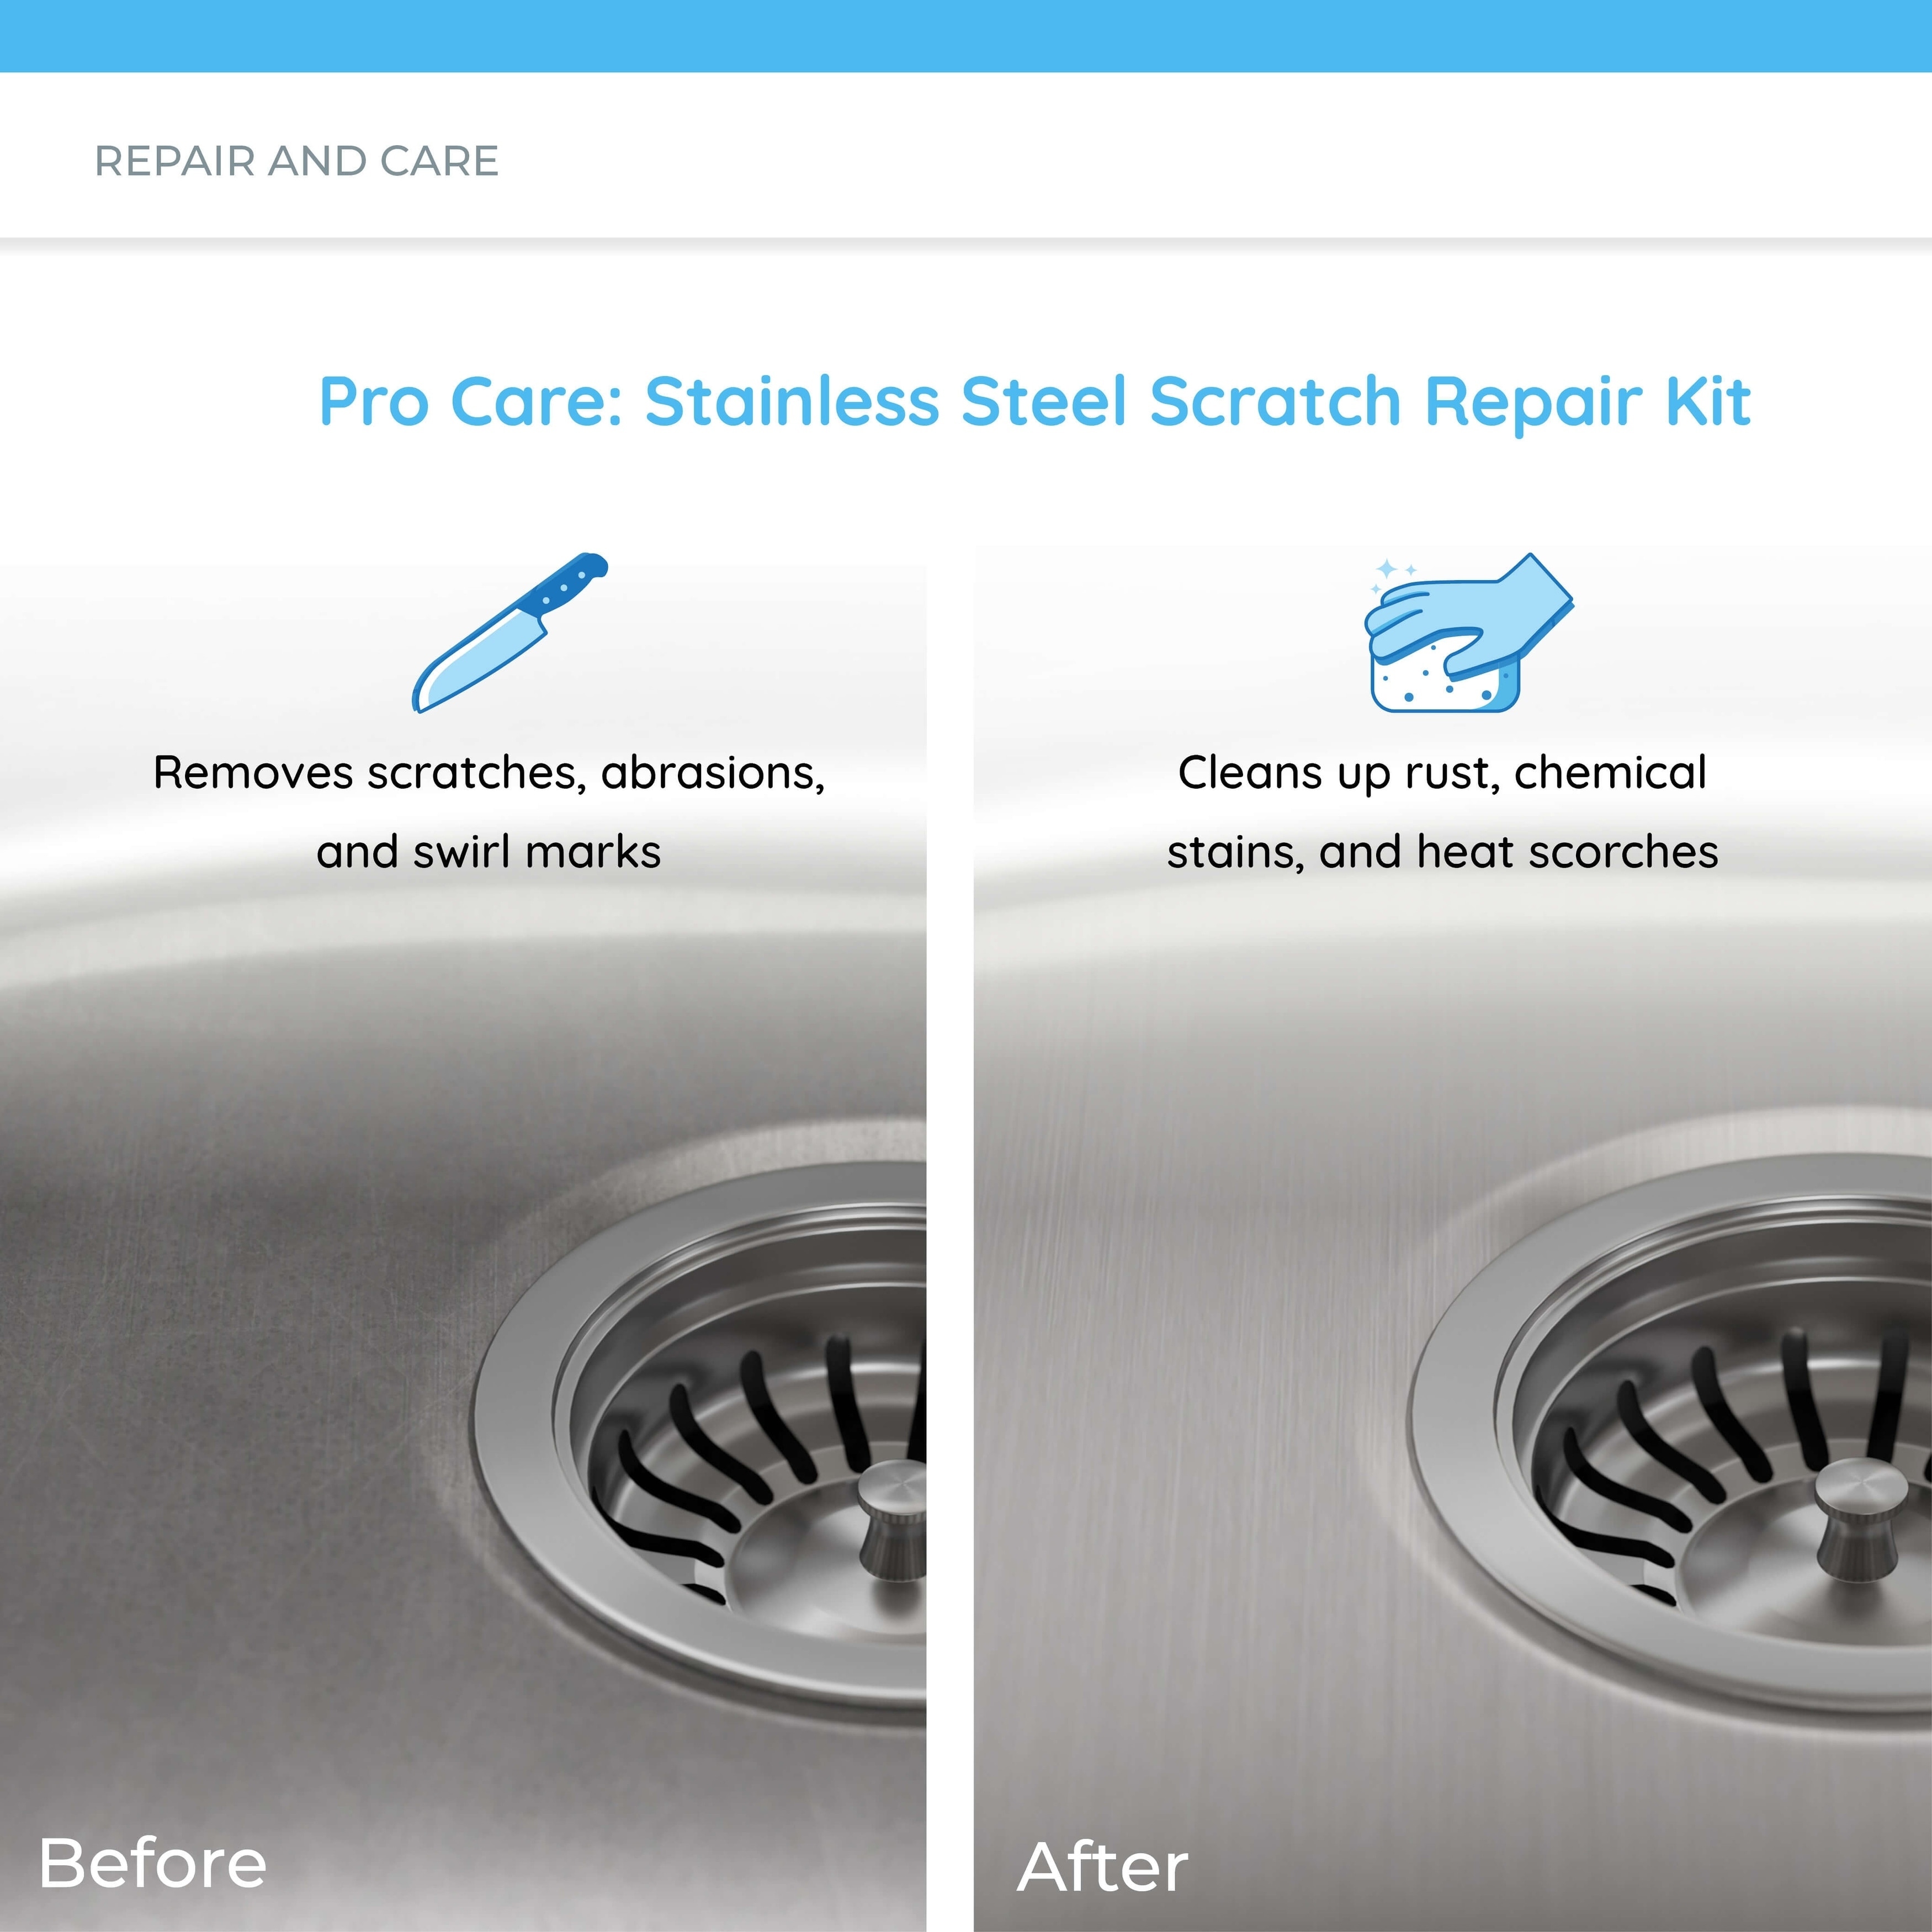 Pro Care: Stainless Steel Scratch Repair Kit